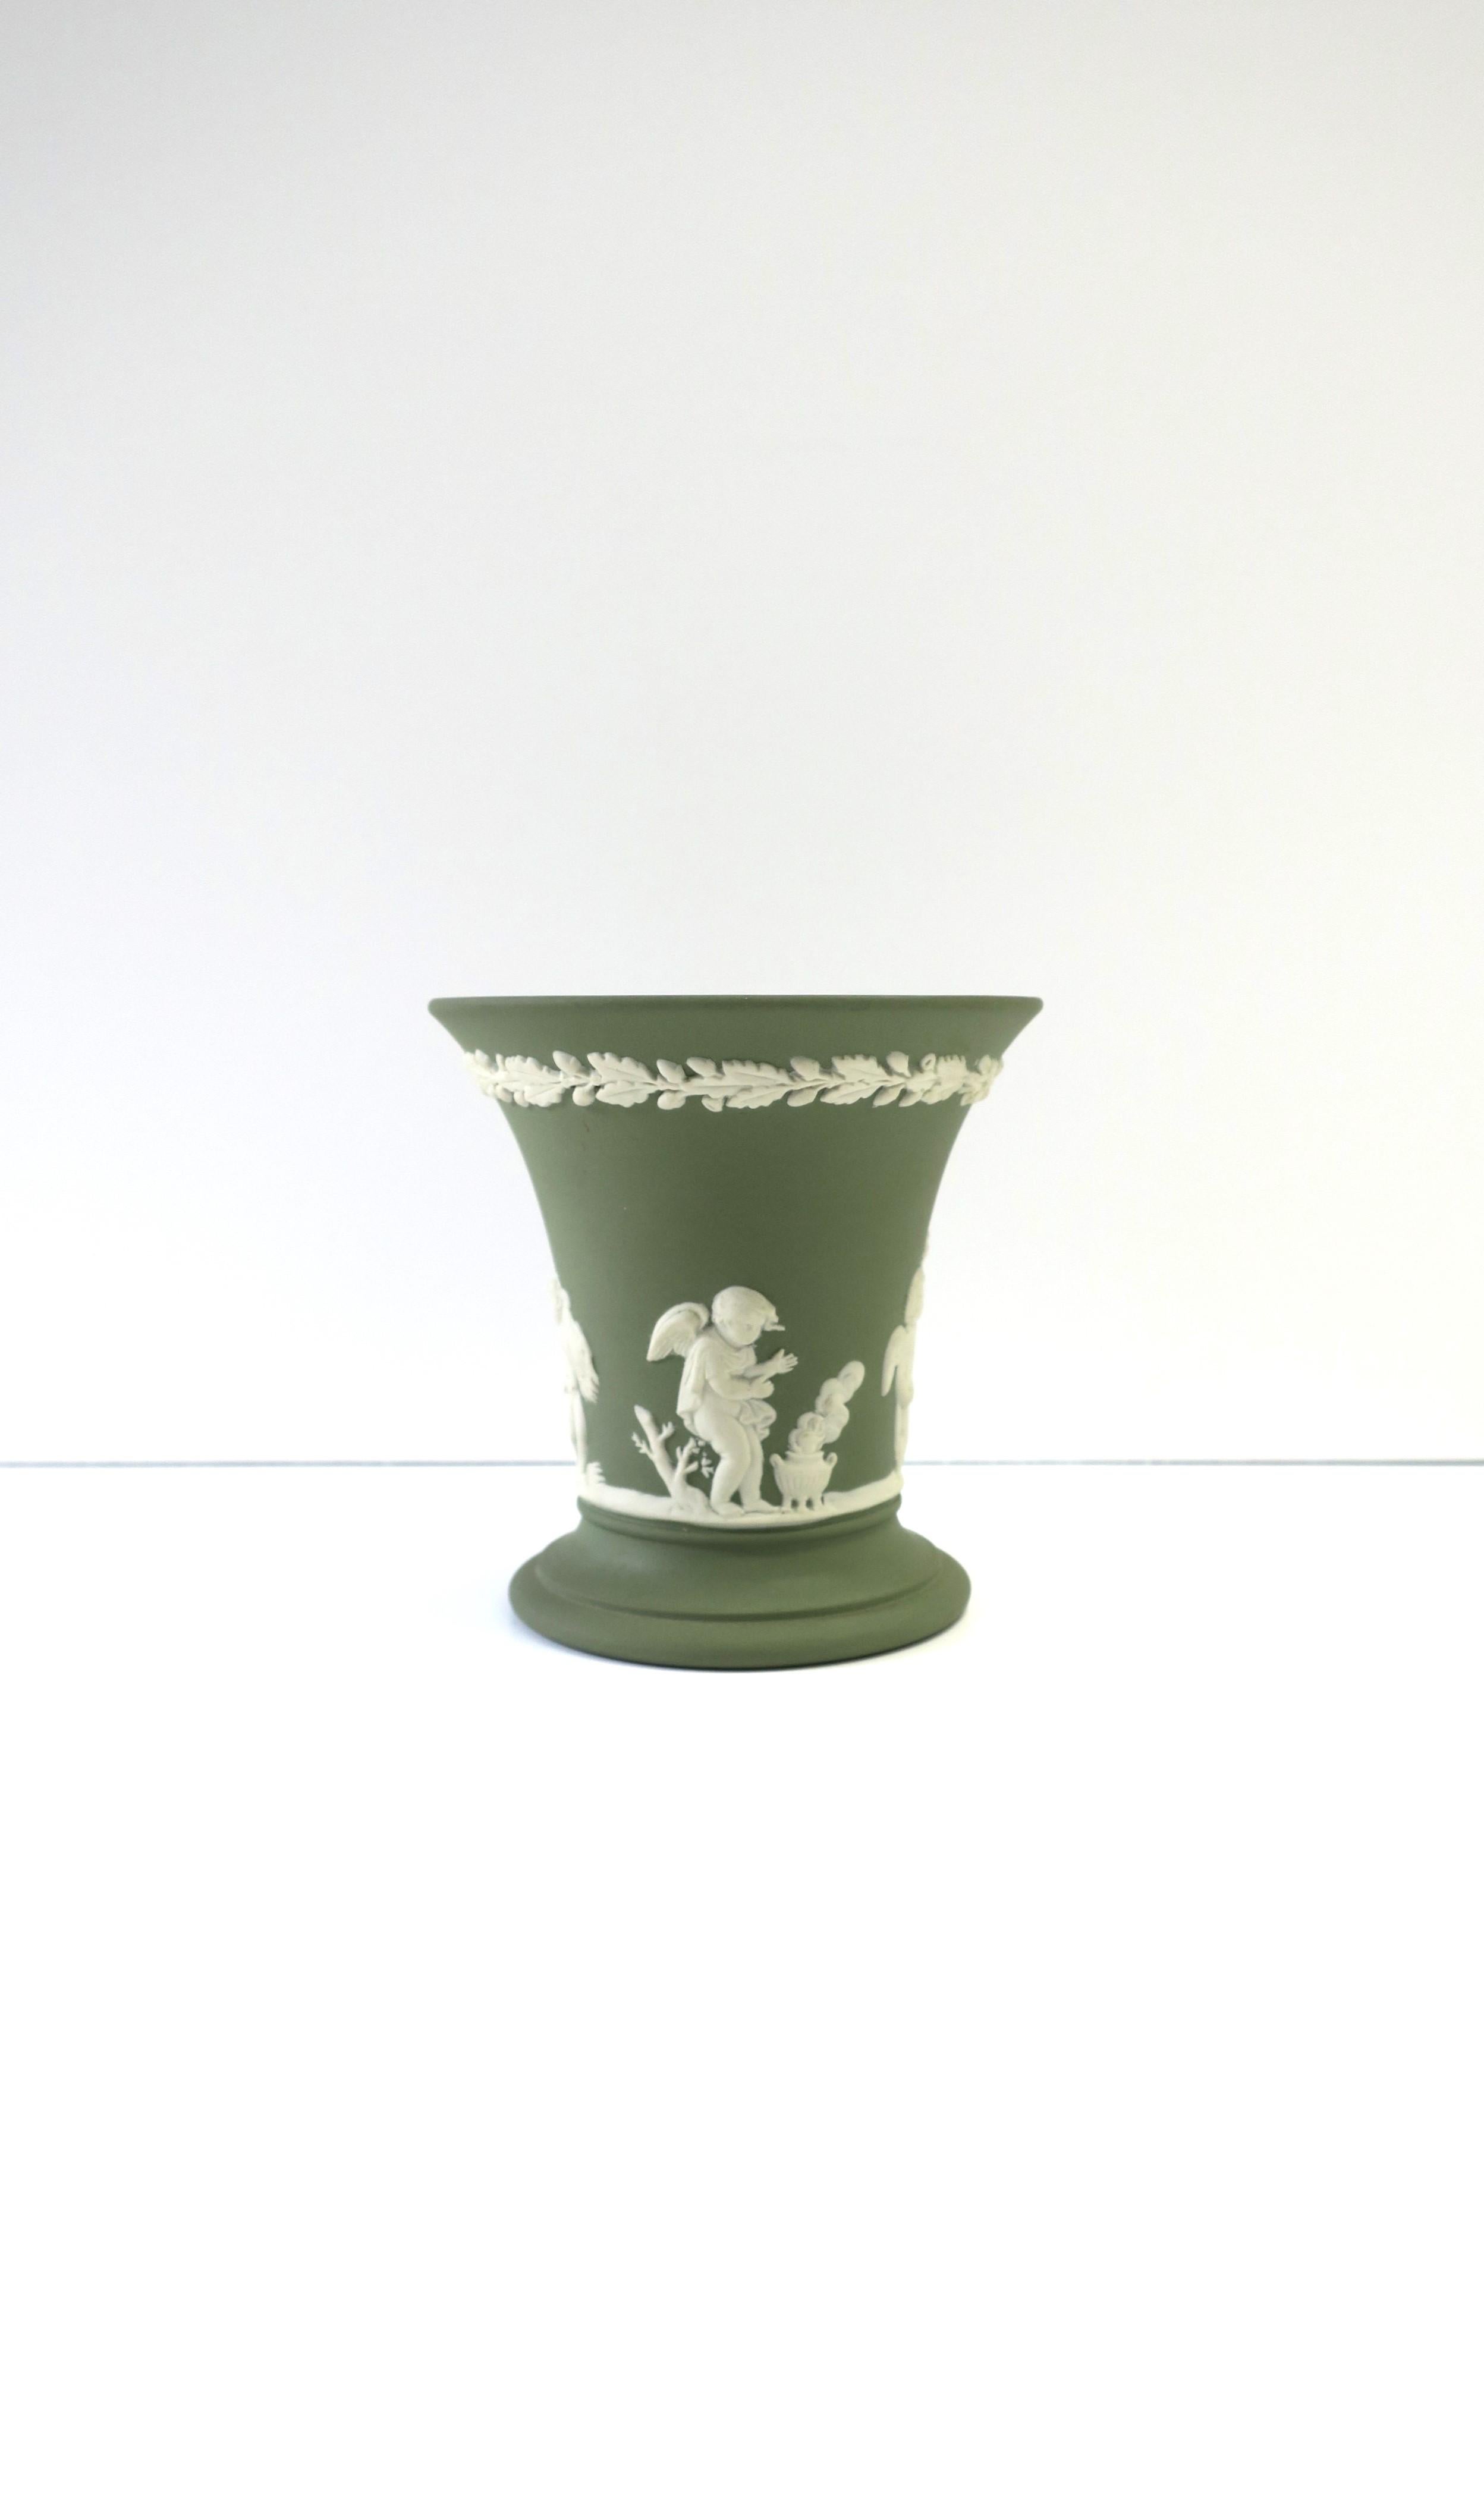 A beautiful 'sage' green and white English Wedgwood Jasperware matte stoneware vase in the Neoclassical style, England, 1973. Vase has Renaissance/Neoclassical raised white relief scene around exterior. All authentication markings on bottom